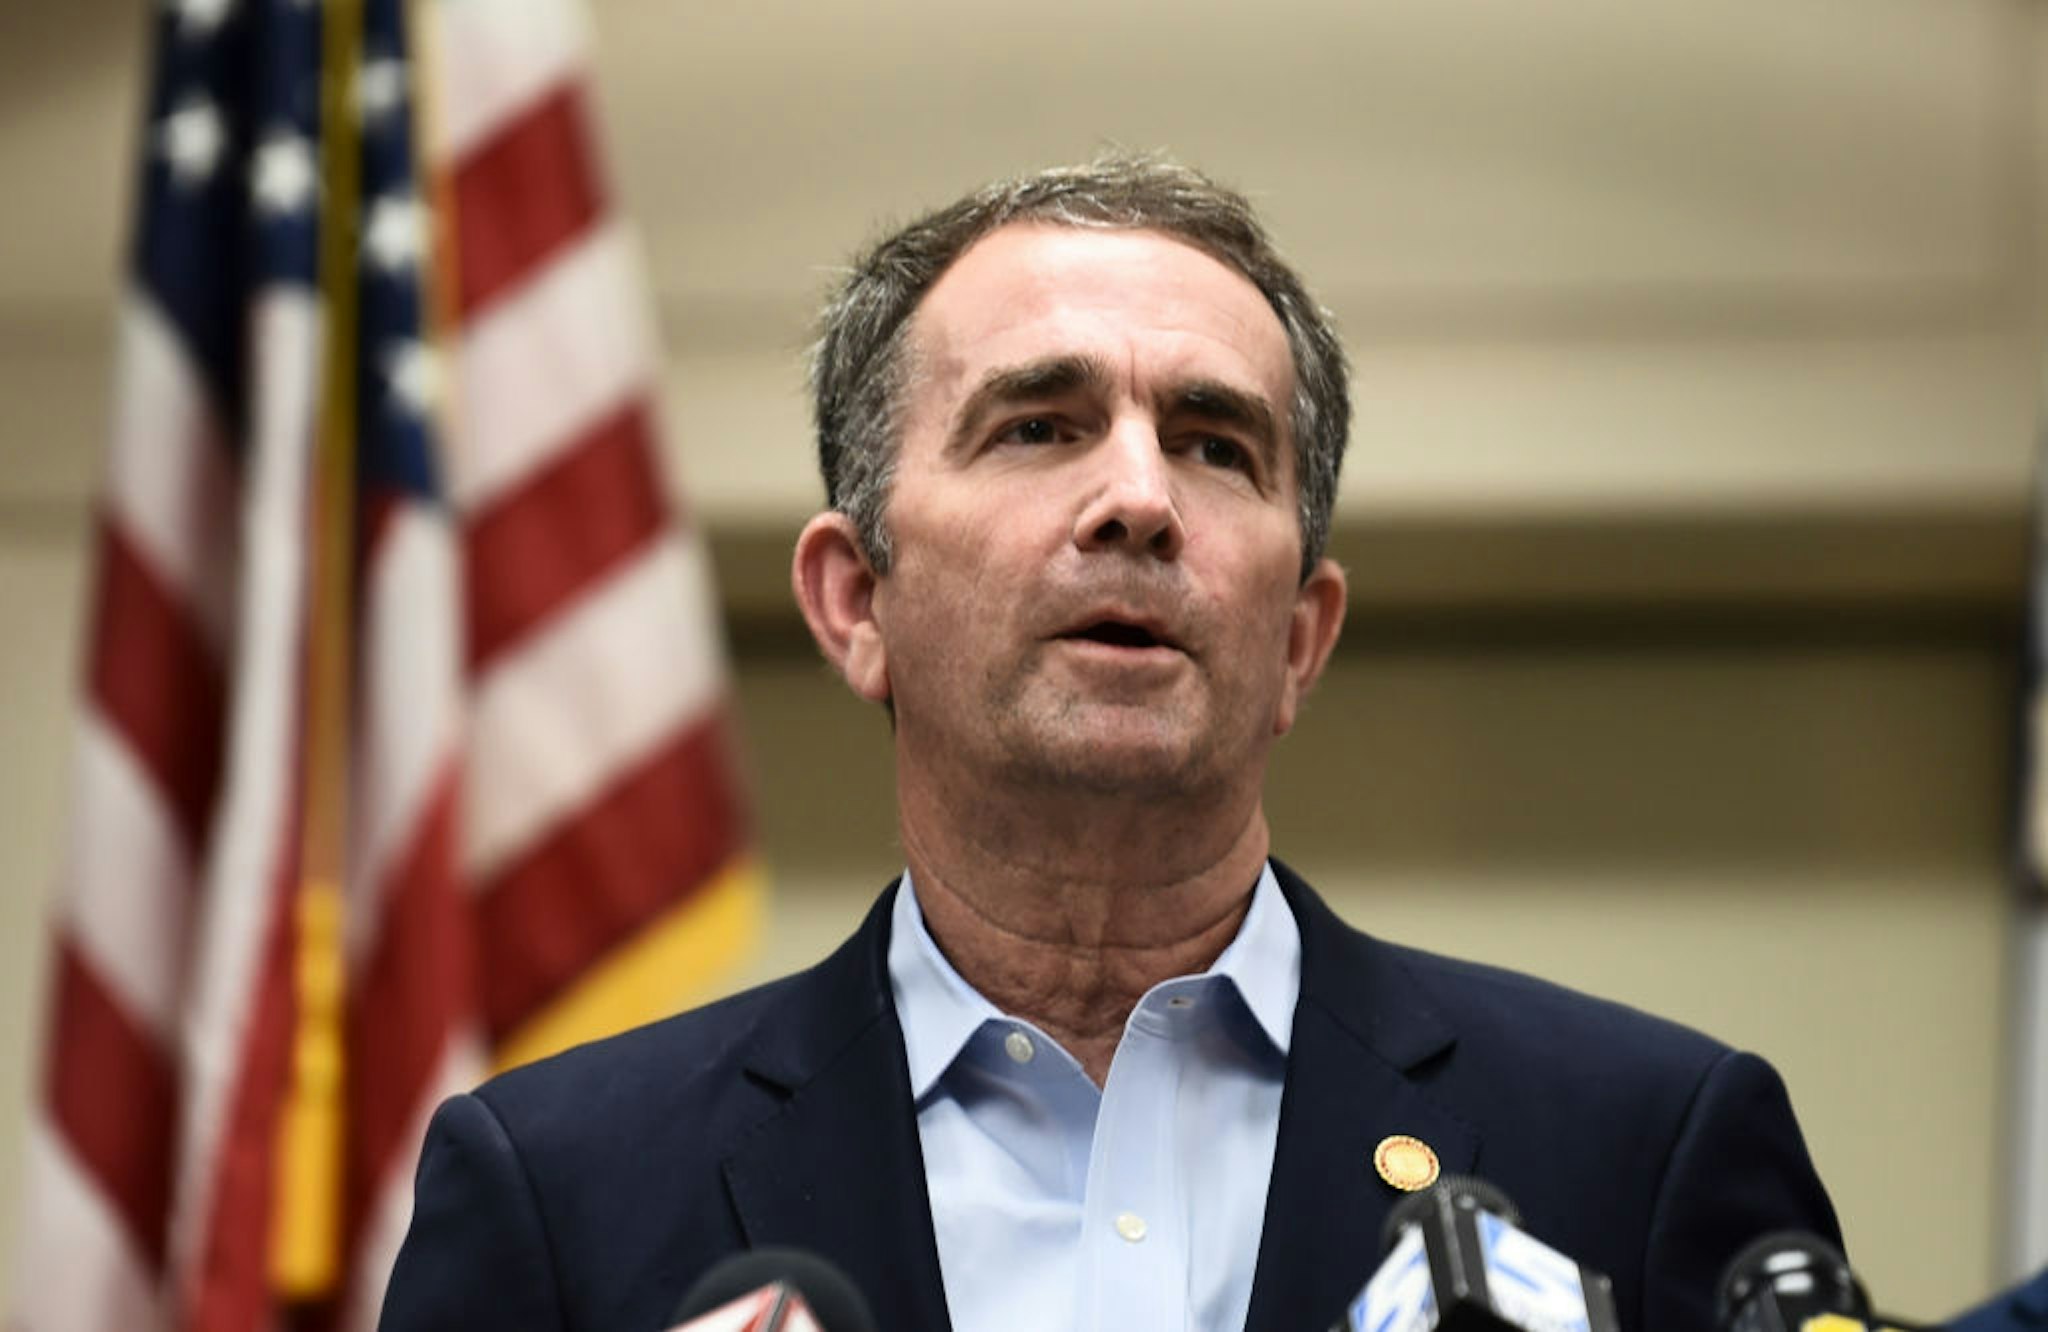 Virginia Governor Ralph Northam speaks to the press about a mass shooting on June 1, 2019, in Virginia, Beach, Virginia. - A municipal employee sprayed gunfire "indiscriminately" in a government building complex on May 31, 2019, police said, killing 12 people and wounding four in the latest mass shooting to rock the US. (Photo by Eric BARADAT / AFP) (Photo credit should read ERIC BARADAT/AFP via Getty Images)